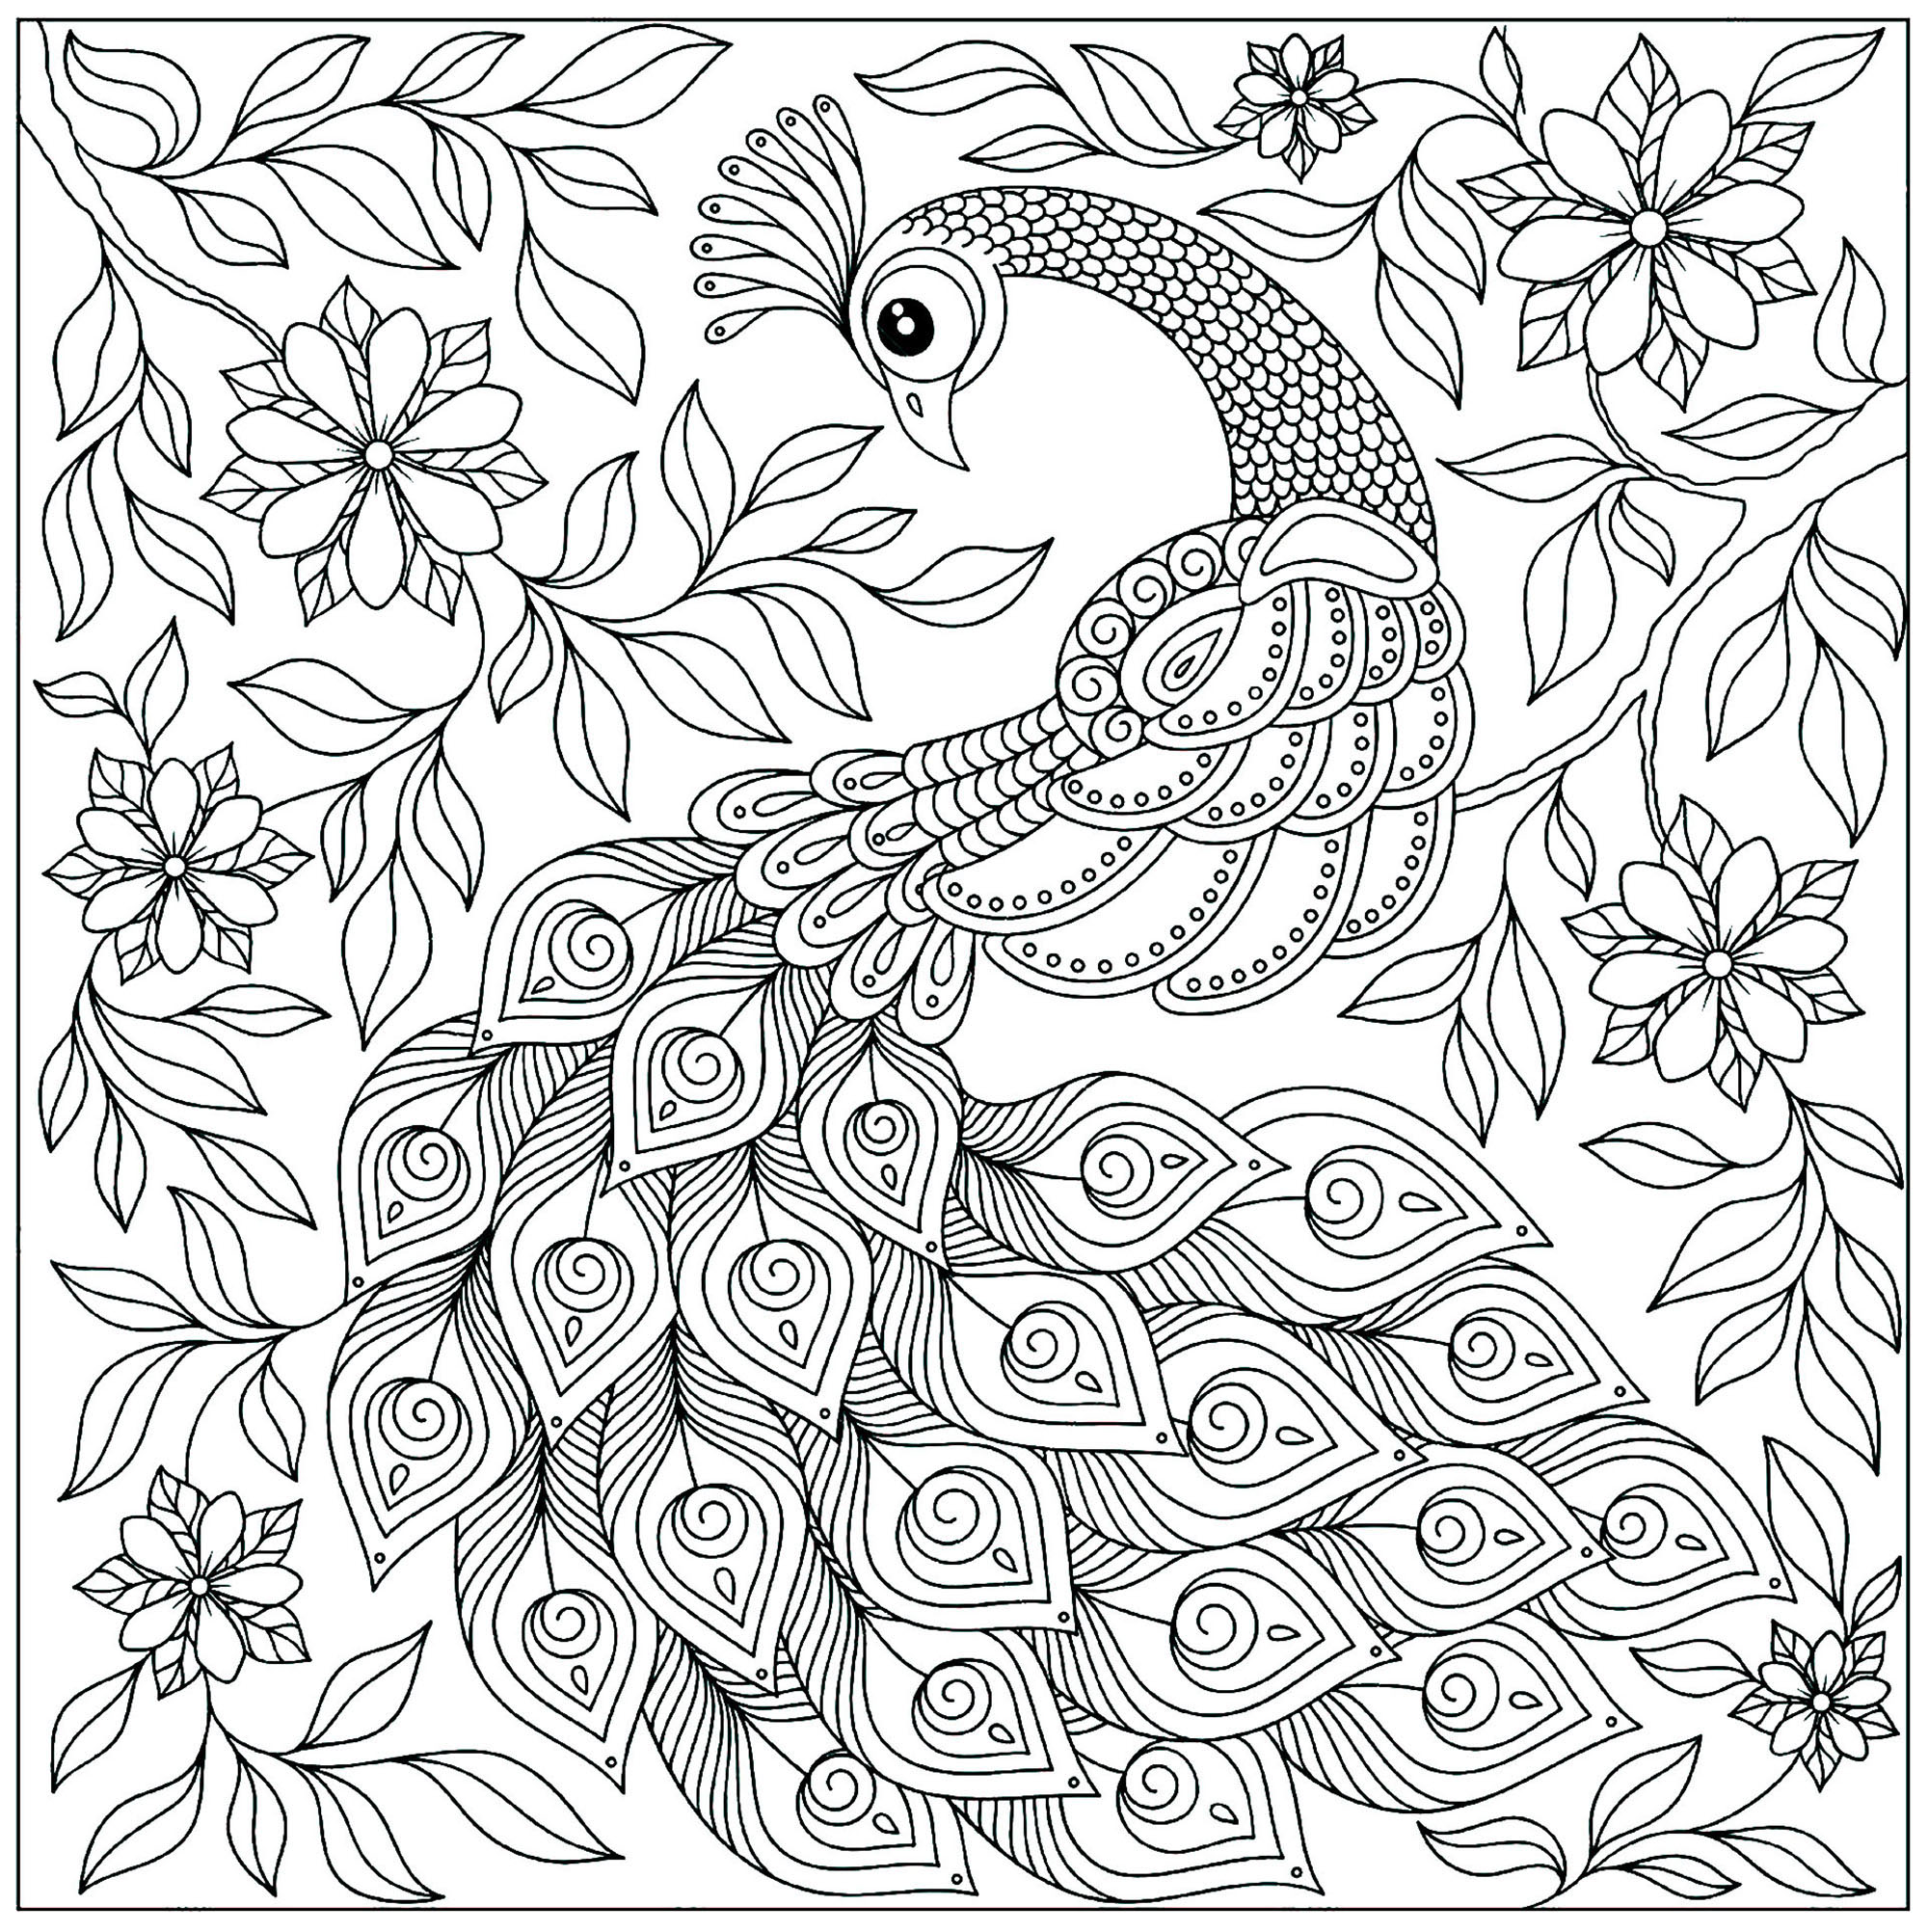 peacocks-to-print-peacocks-kids-coloring-pages